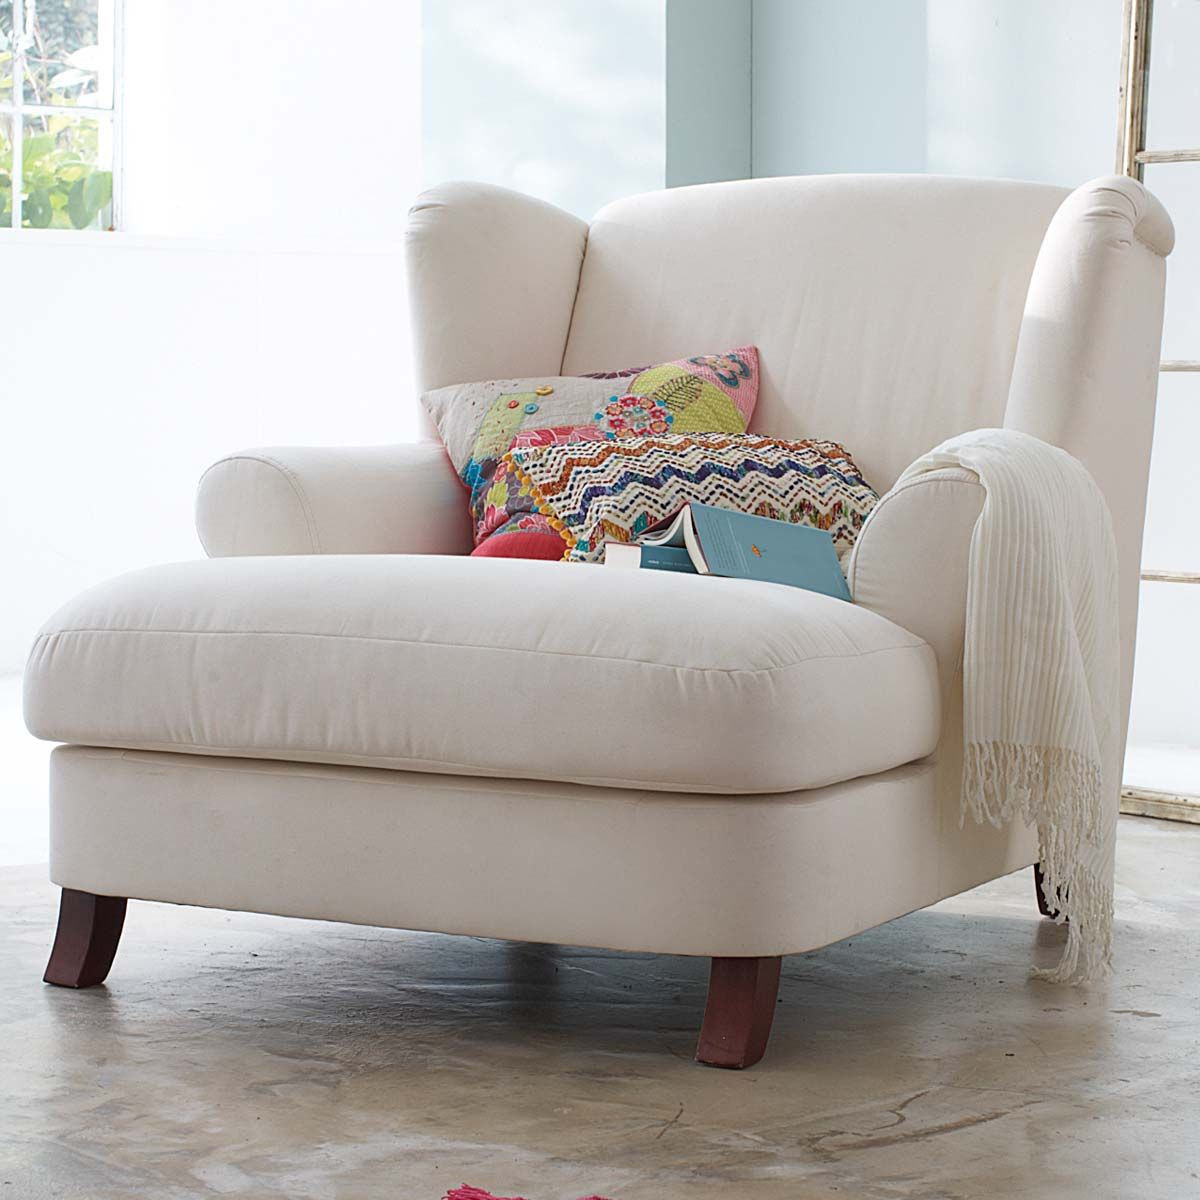 Small Comfy Chair For Bedroom
 dream chair via somewhere north